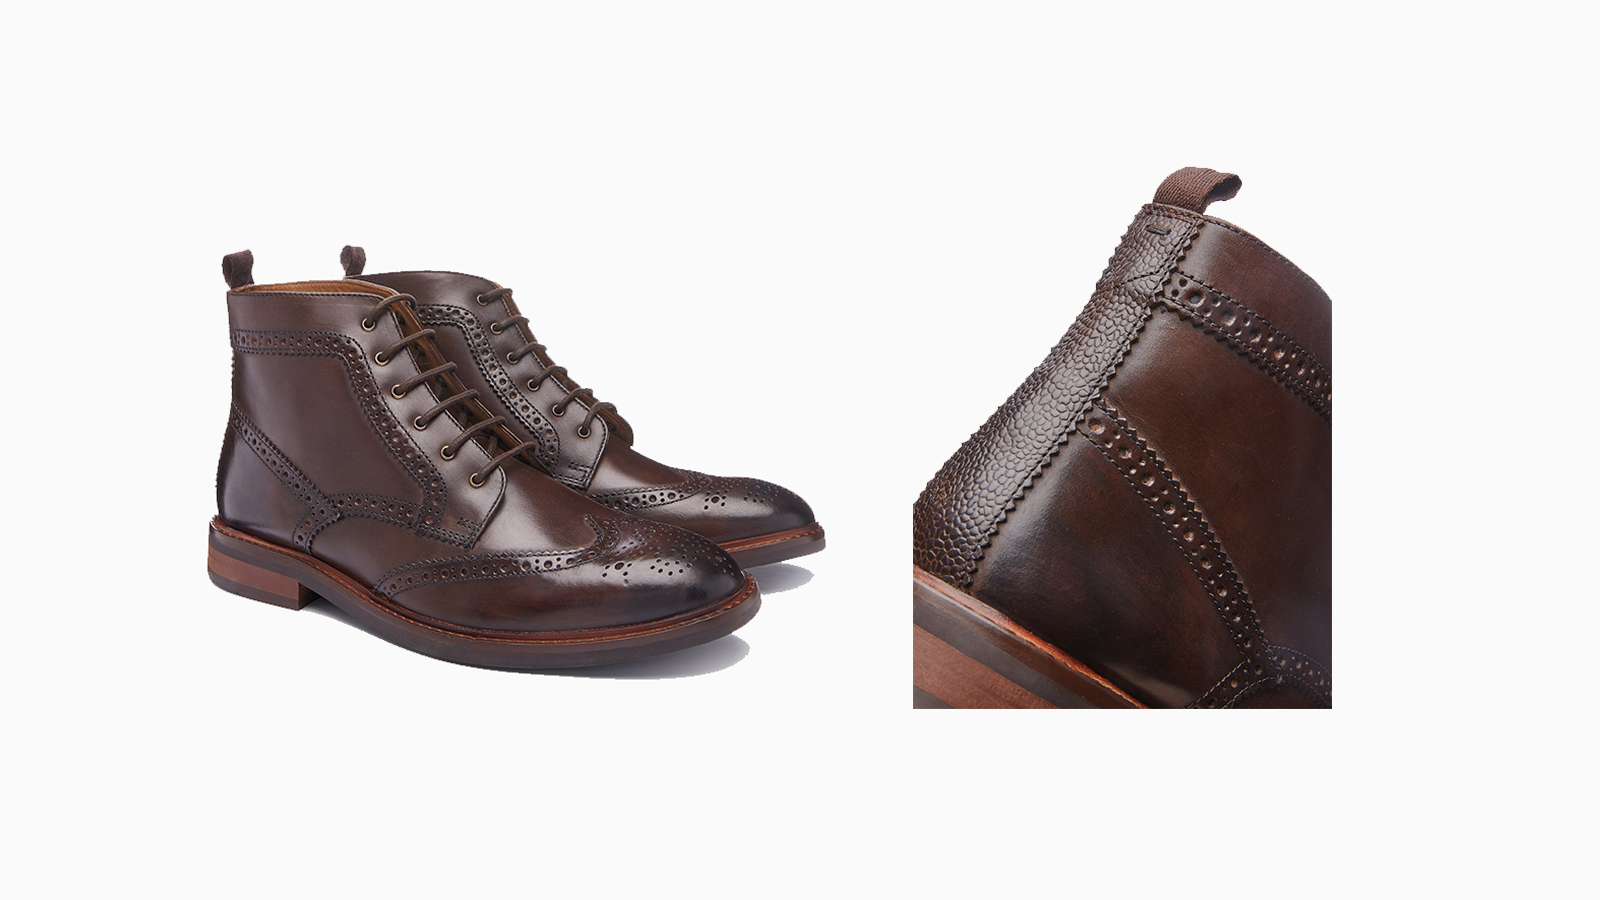 The winter boots to wear now - Chukka boots